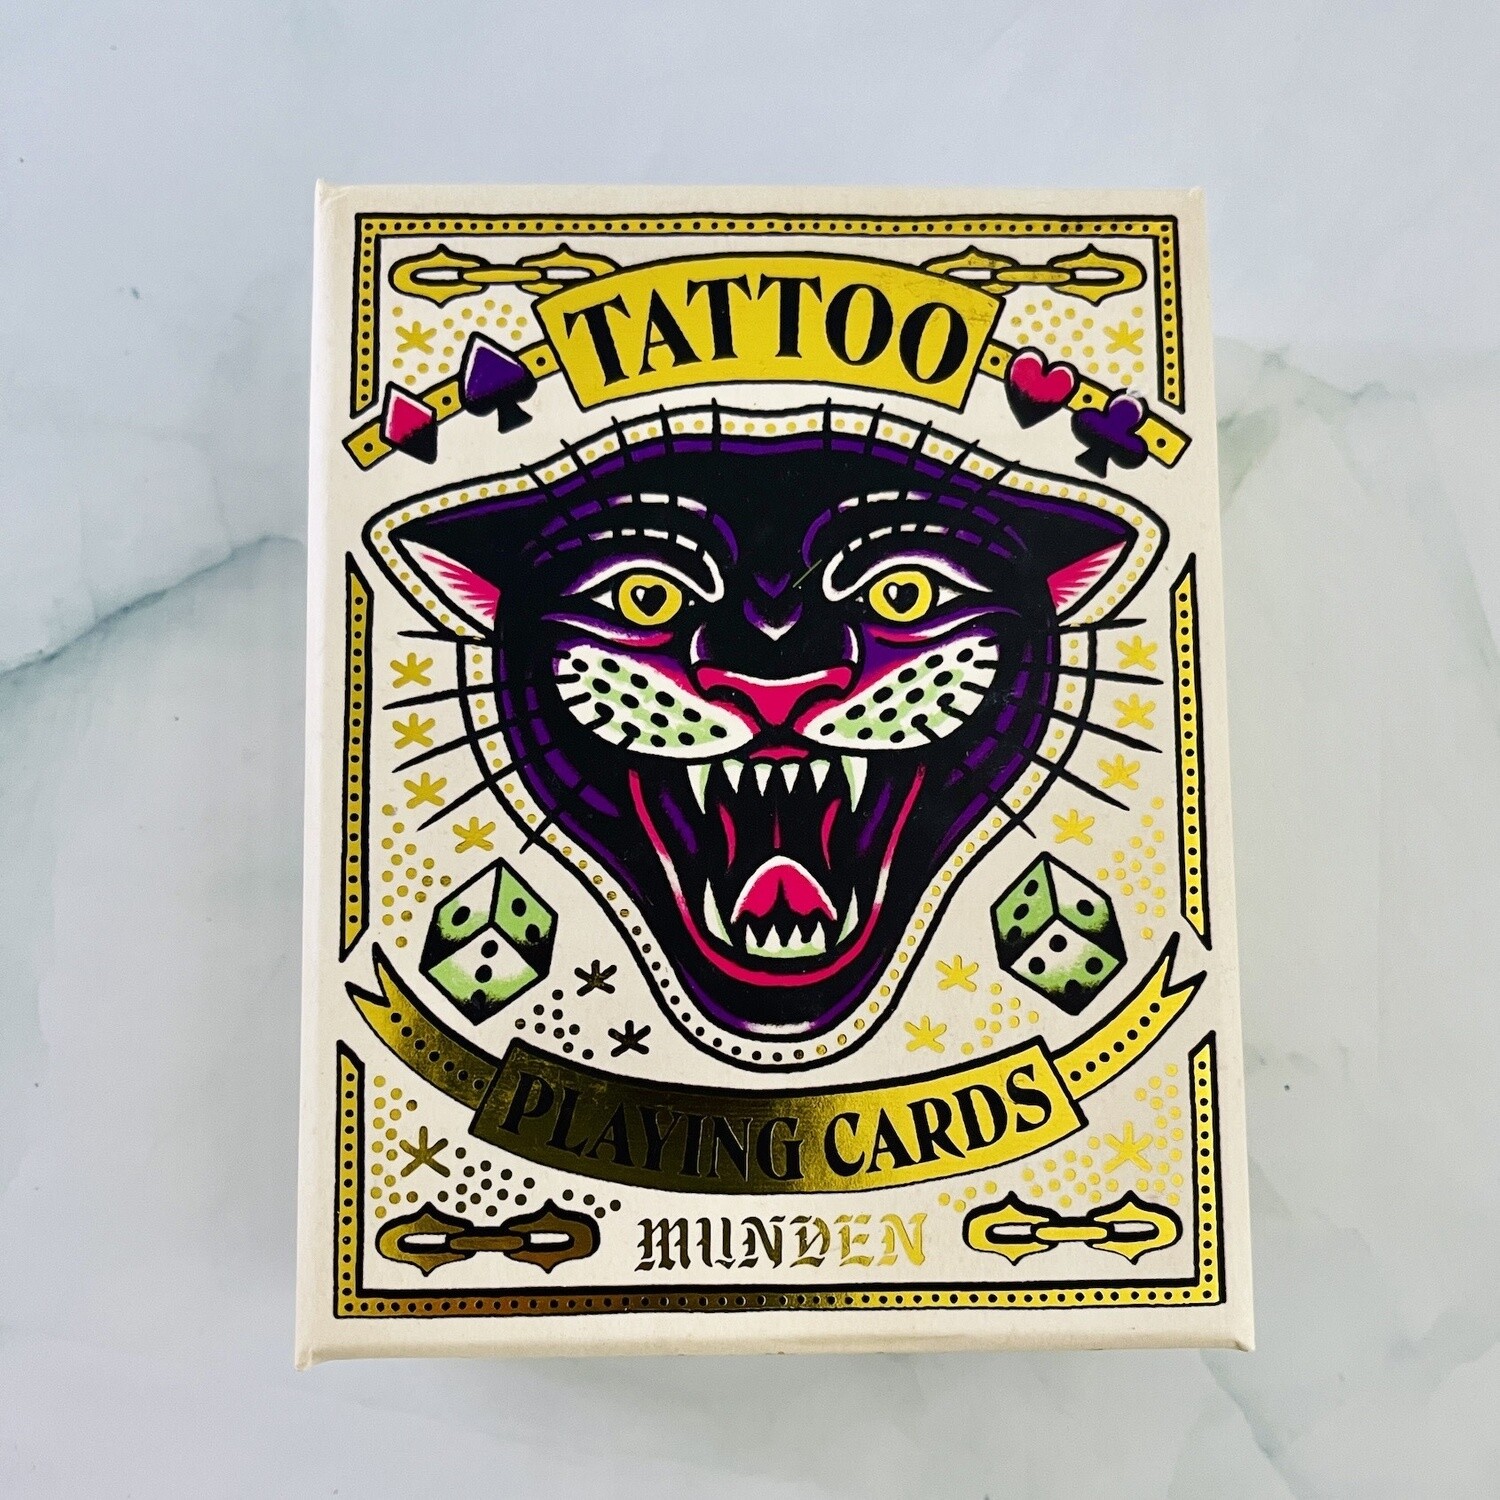 Tattoo Playing Cards: ILLUSTRATED BY OLIVER MUNDEN